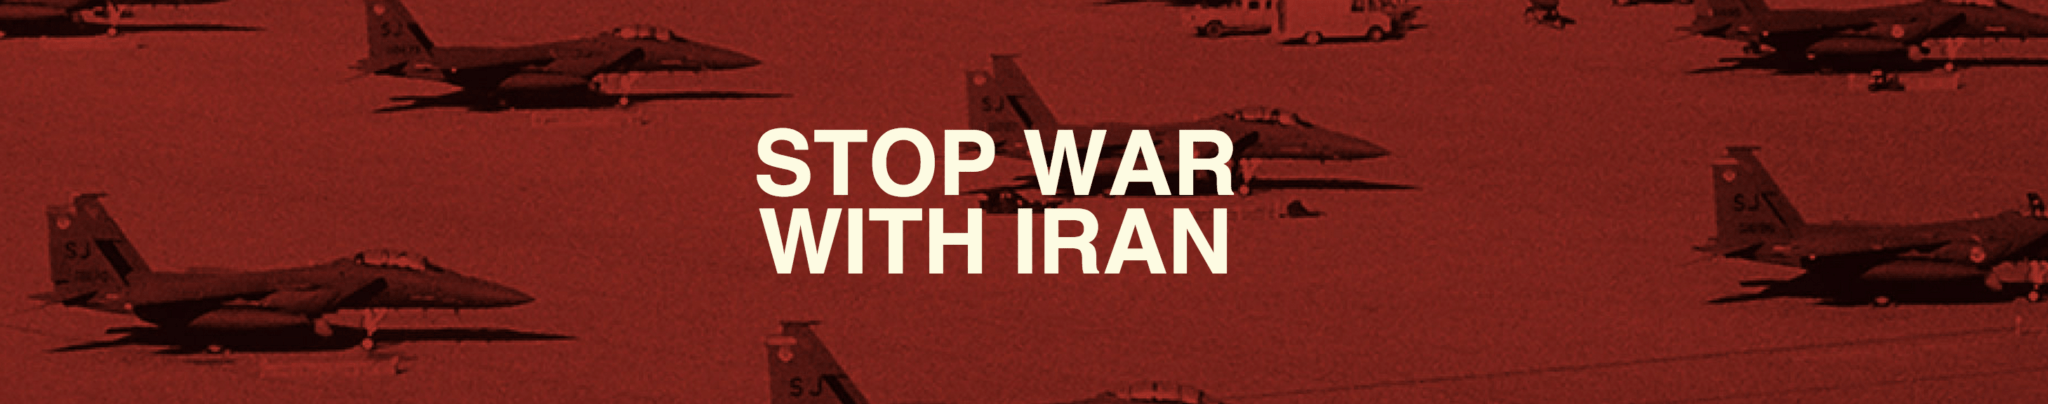 PETITION: Act Now to Save Iran Deal!